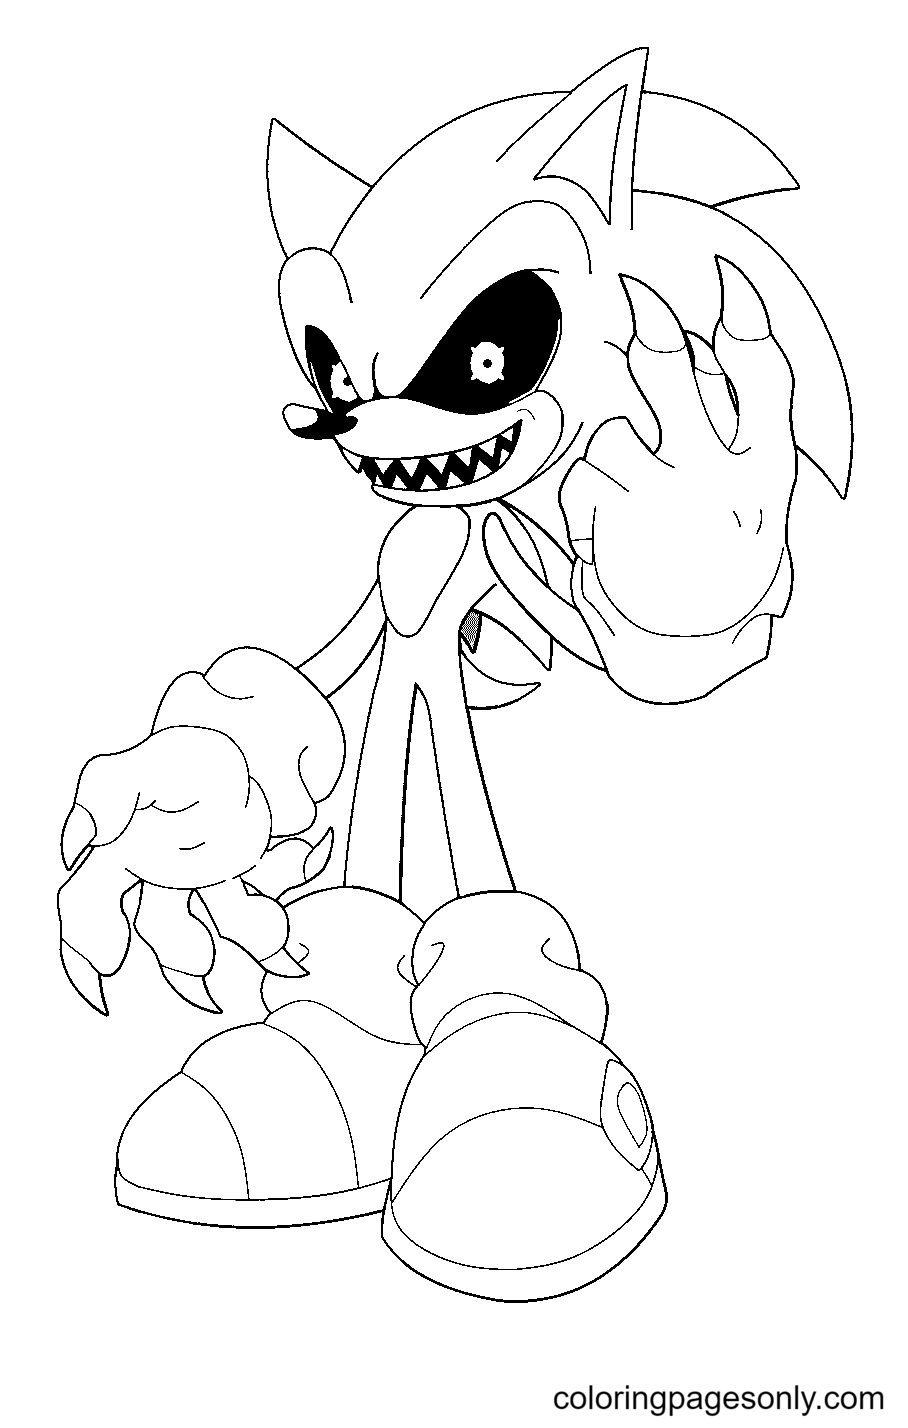 Free Printable Sonic EXE Coloring Pages For Kids  Cartoon coloring pages,  Coloring pages, Pumpkin coloring pages